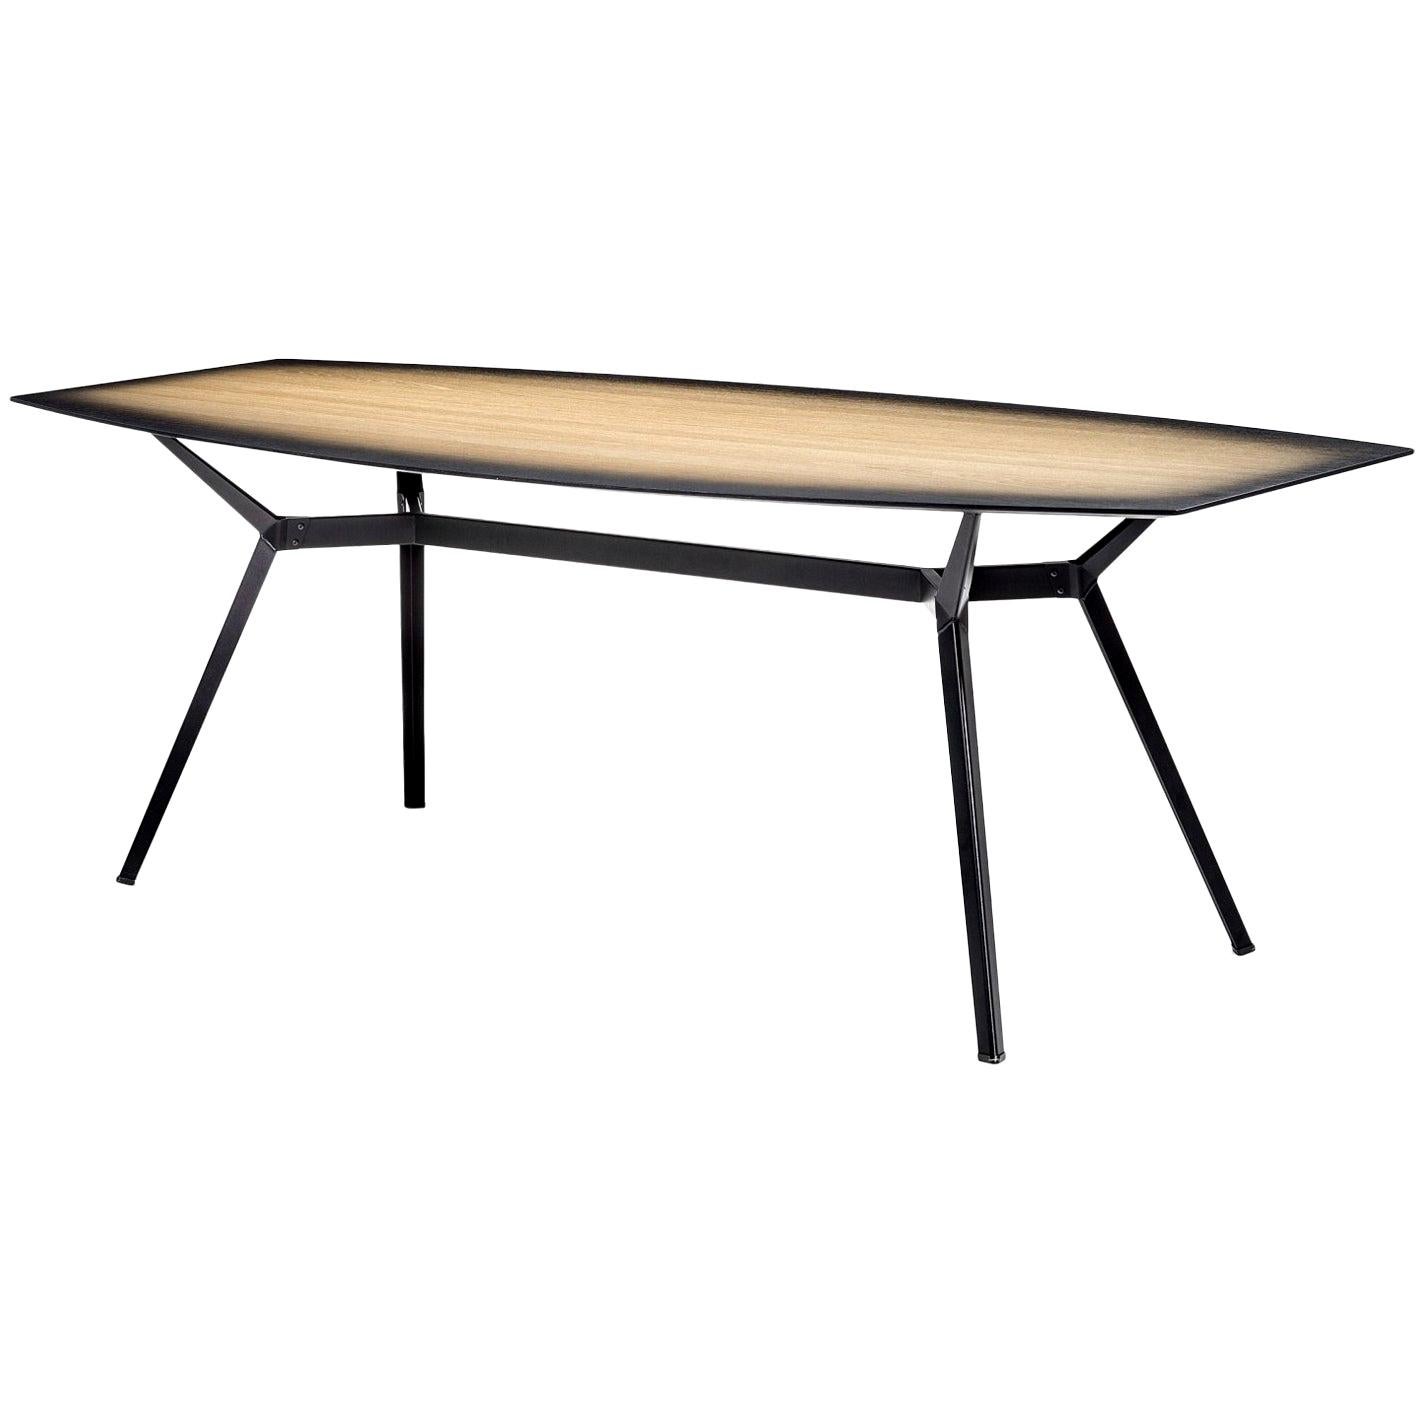 "Pylon Gradient" Rectangular Dining Table in Wood & Steel by Moroso for Diesel For Sale